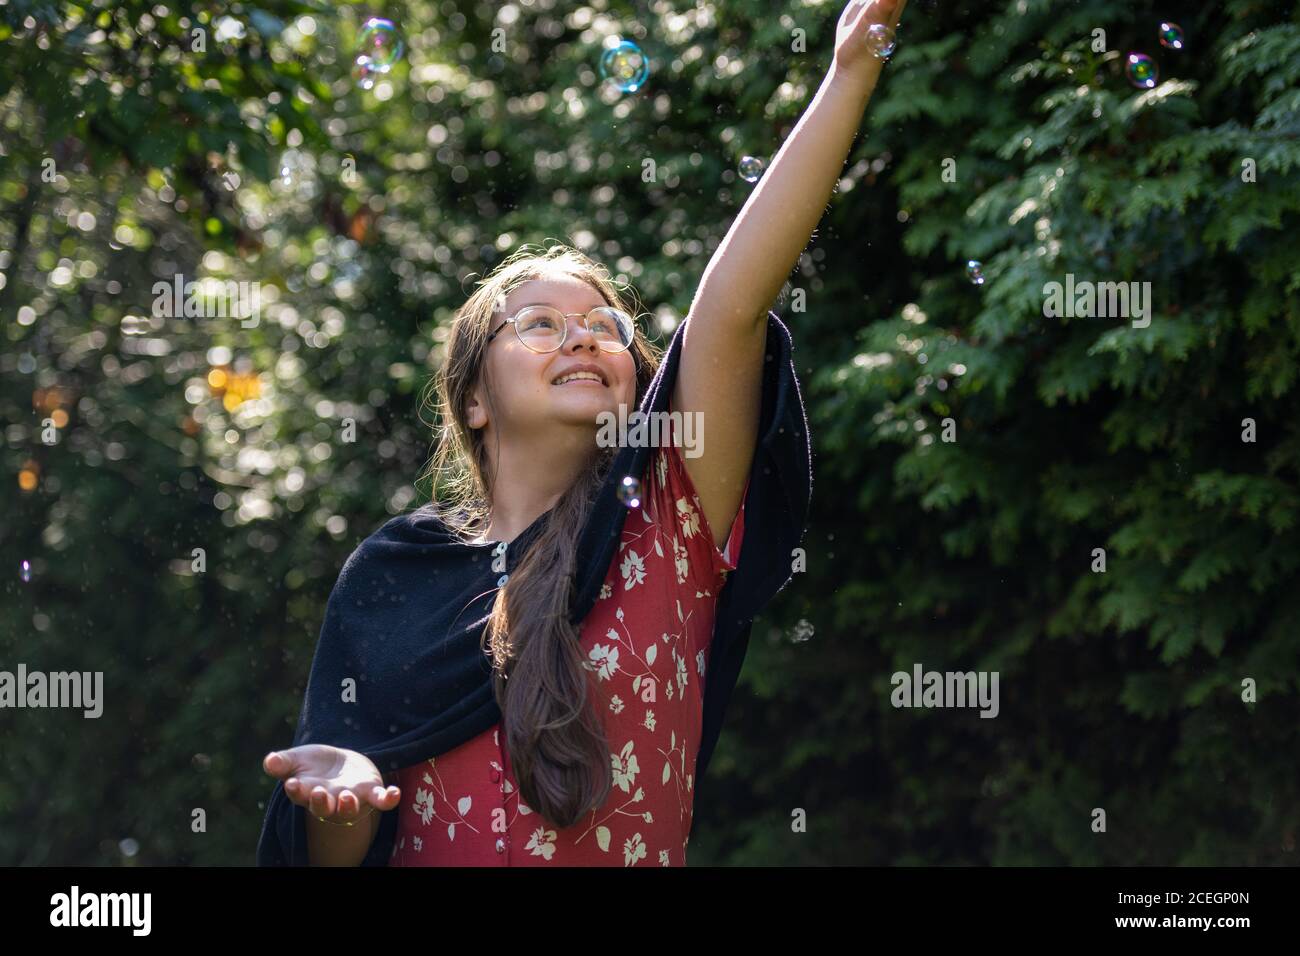 A preteen girl chasing soap bubbles. Shallow depth of field. Green leaves background. Stock Photo